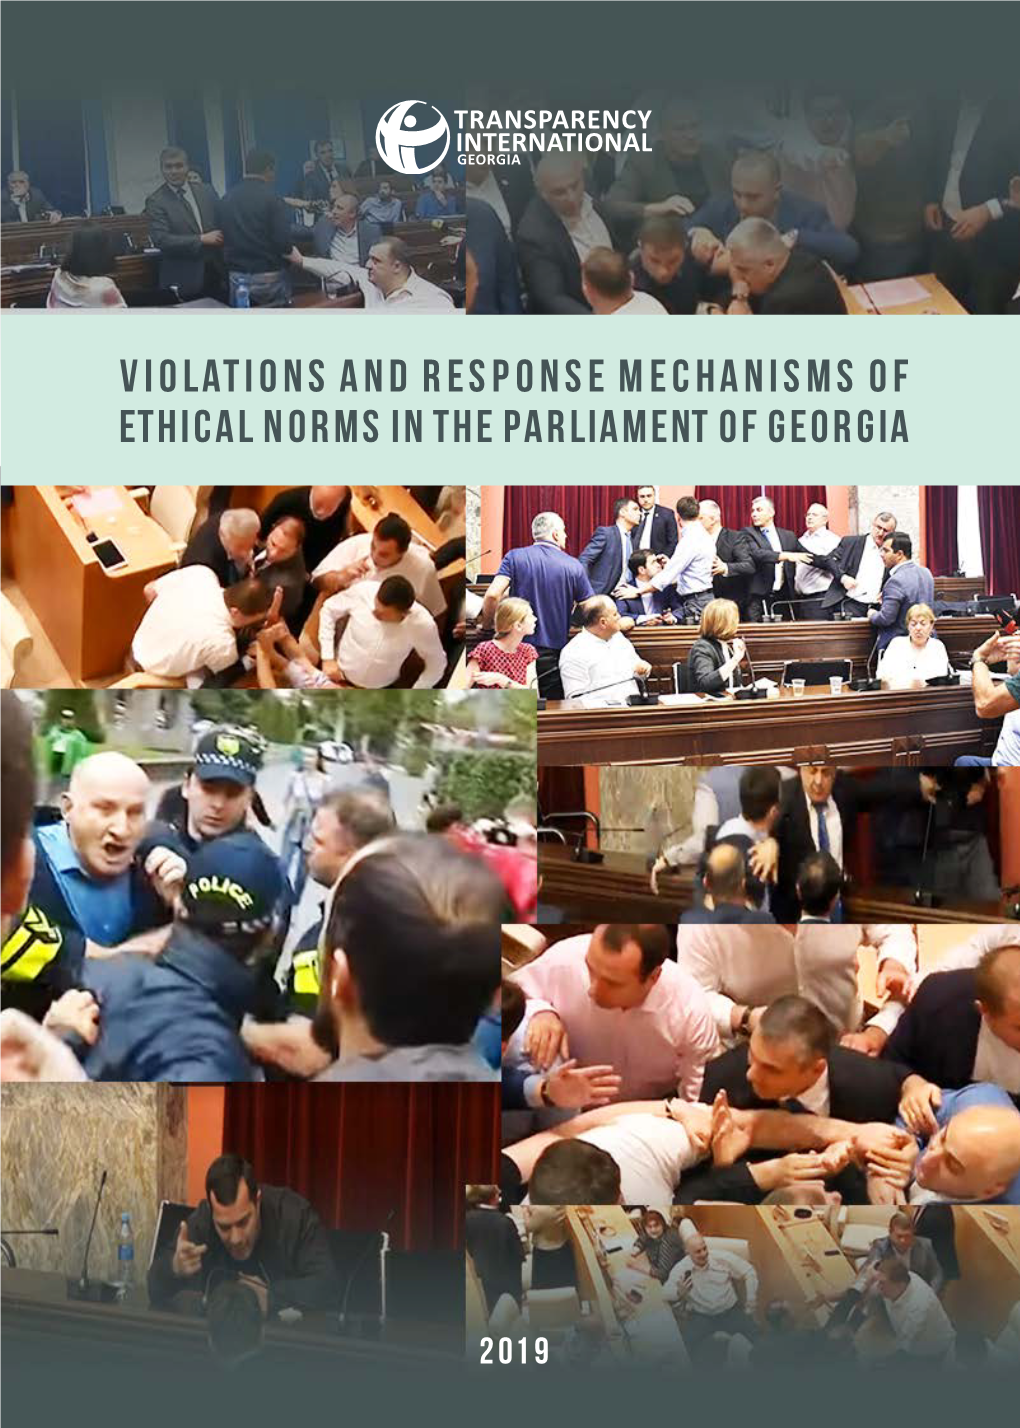 Violations and Response Mechanisms of Ethical Norms in the Parliament of Georgia